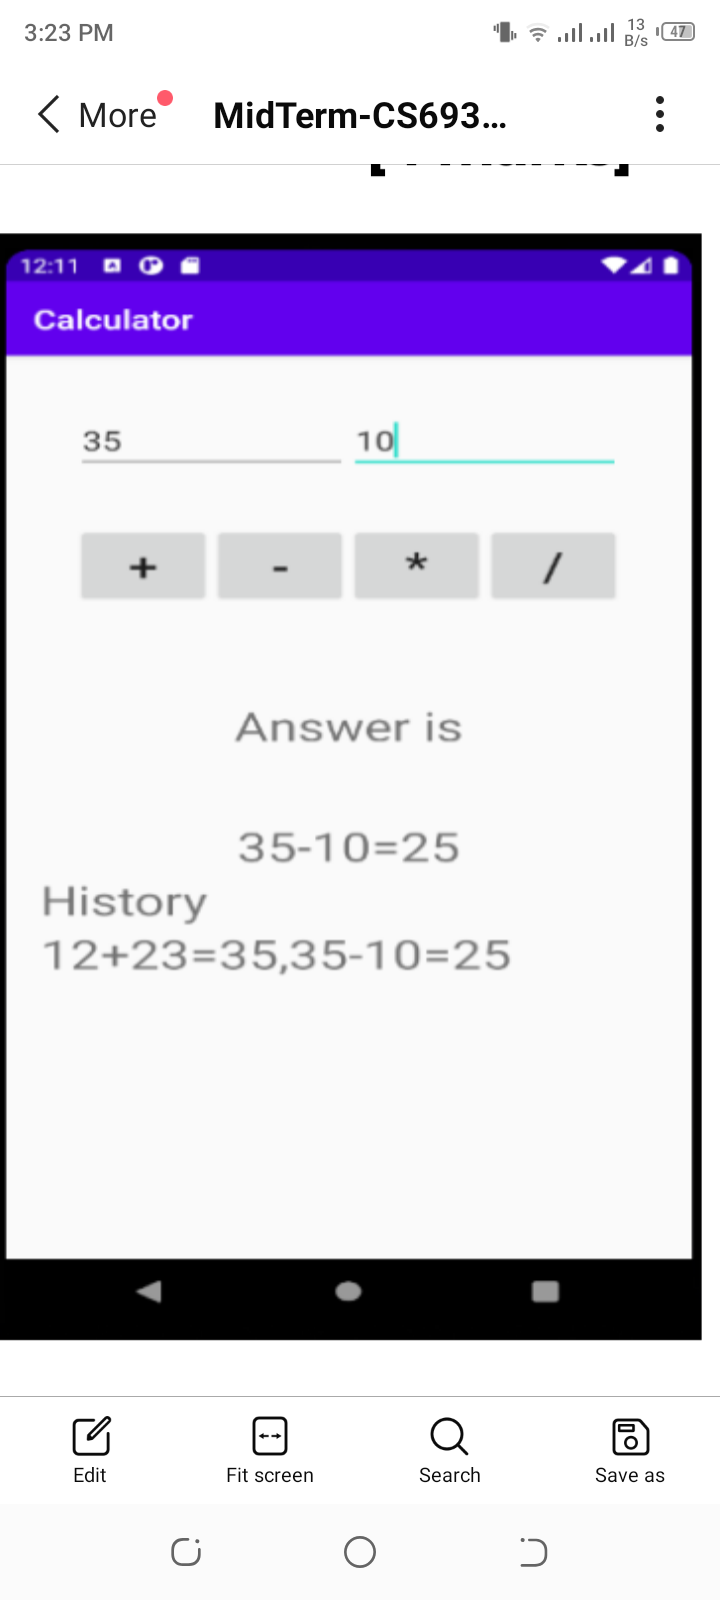 13
3:23 PM
!1. ! ,םי
(47
B/s
( More
MidTerm-CS693...
12:11
Calculator
35
10
+
*
Answer is
35-10=25
History
12+23=35,35-10=25
Q
Edit
Fit screen
Search
Save as
•..
